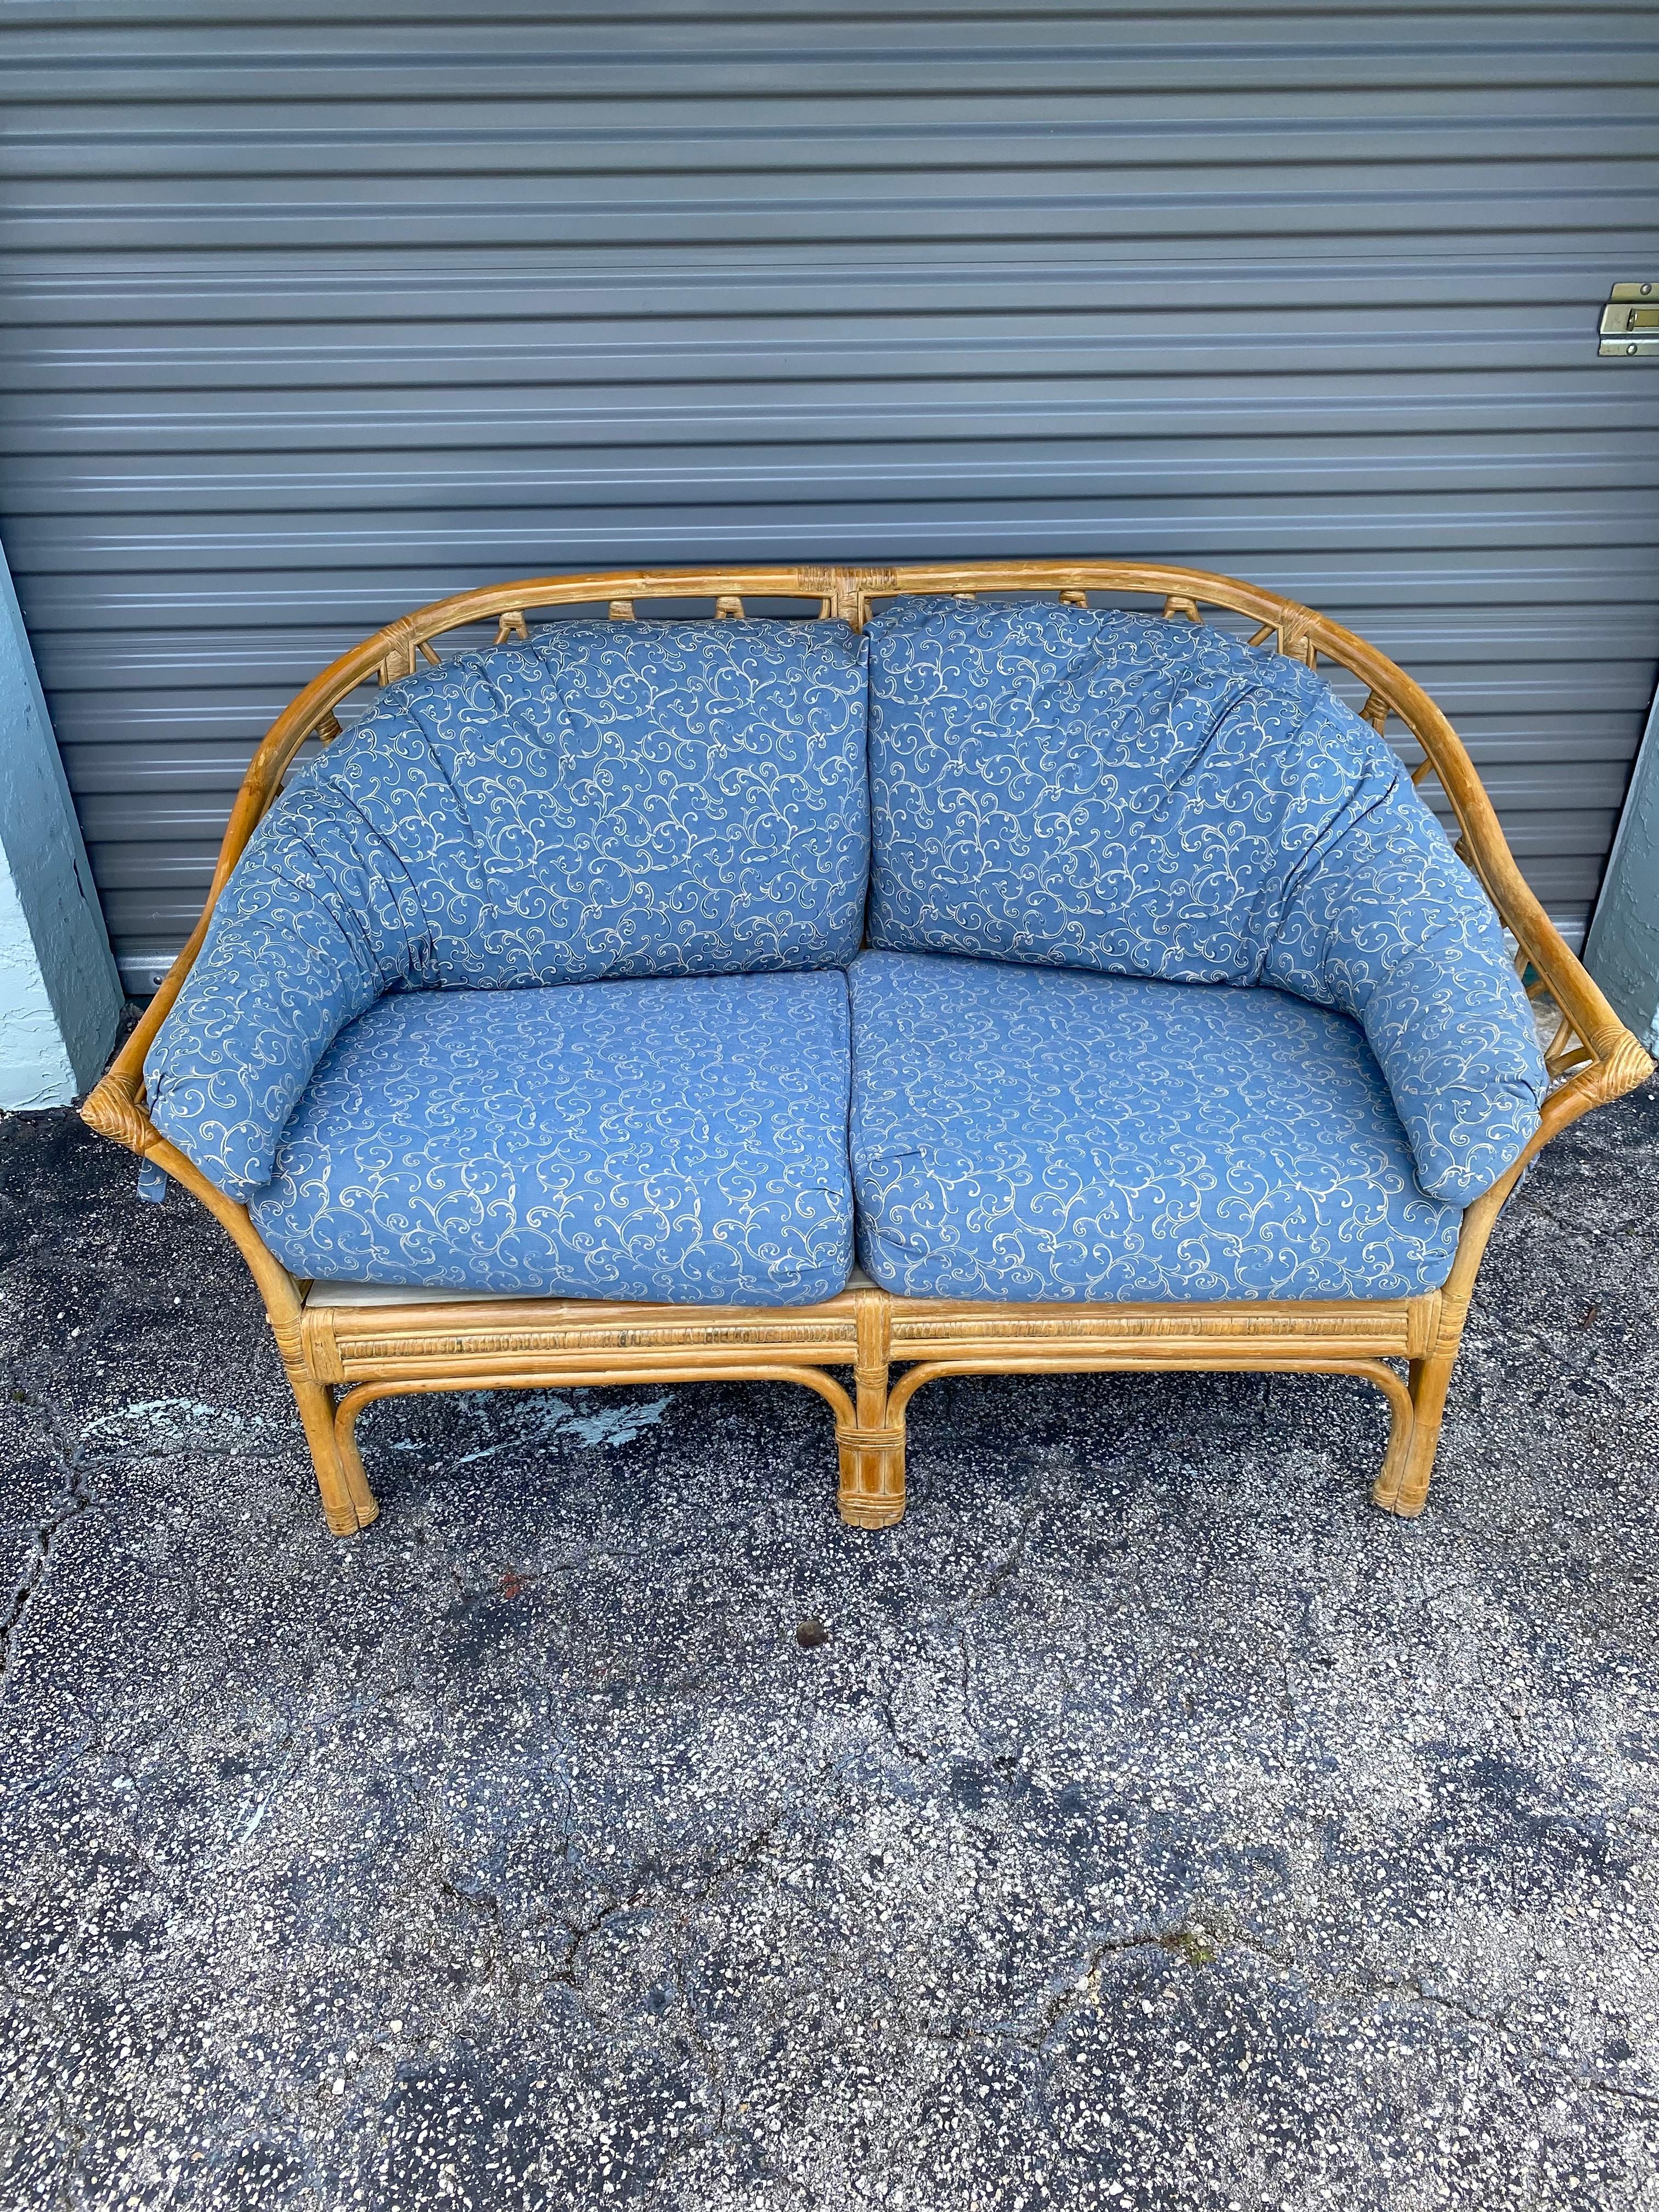 The beautiful rare collection is statement piece which is also extremely comfortable and packed with personality!  Just look at the details and curves on this beauty! Plush denim blue color cushioning and an exceptionally deep seat lend inviting